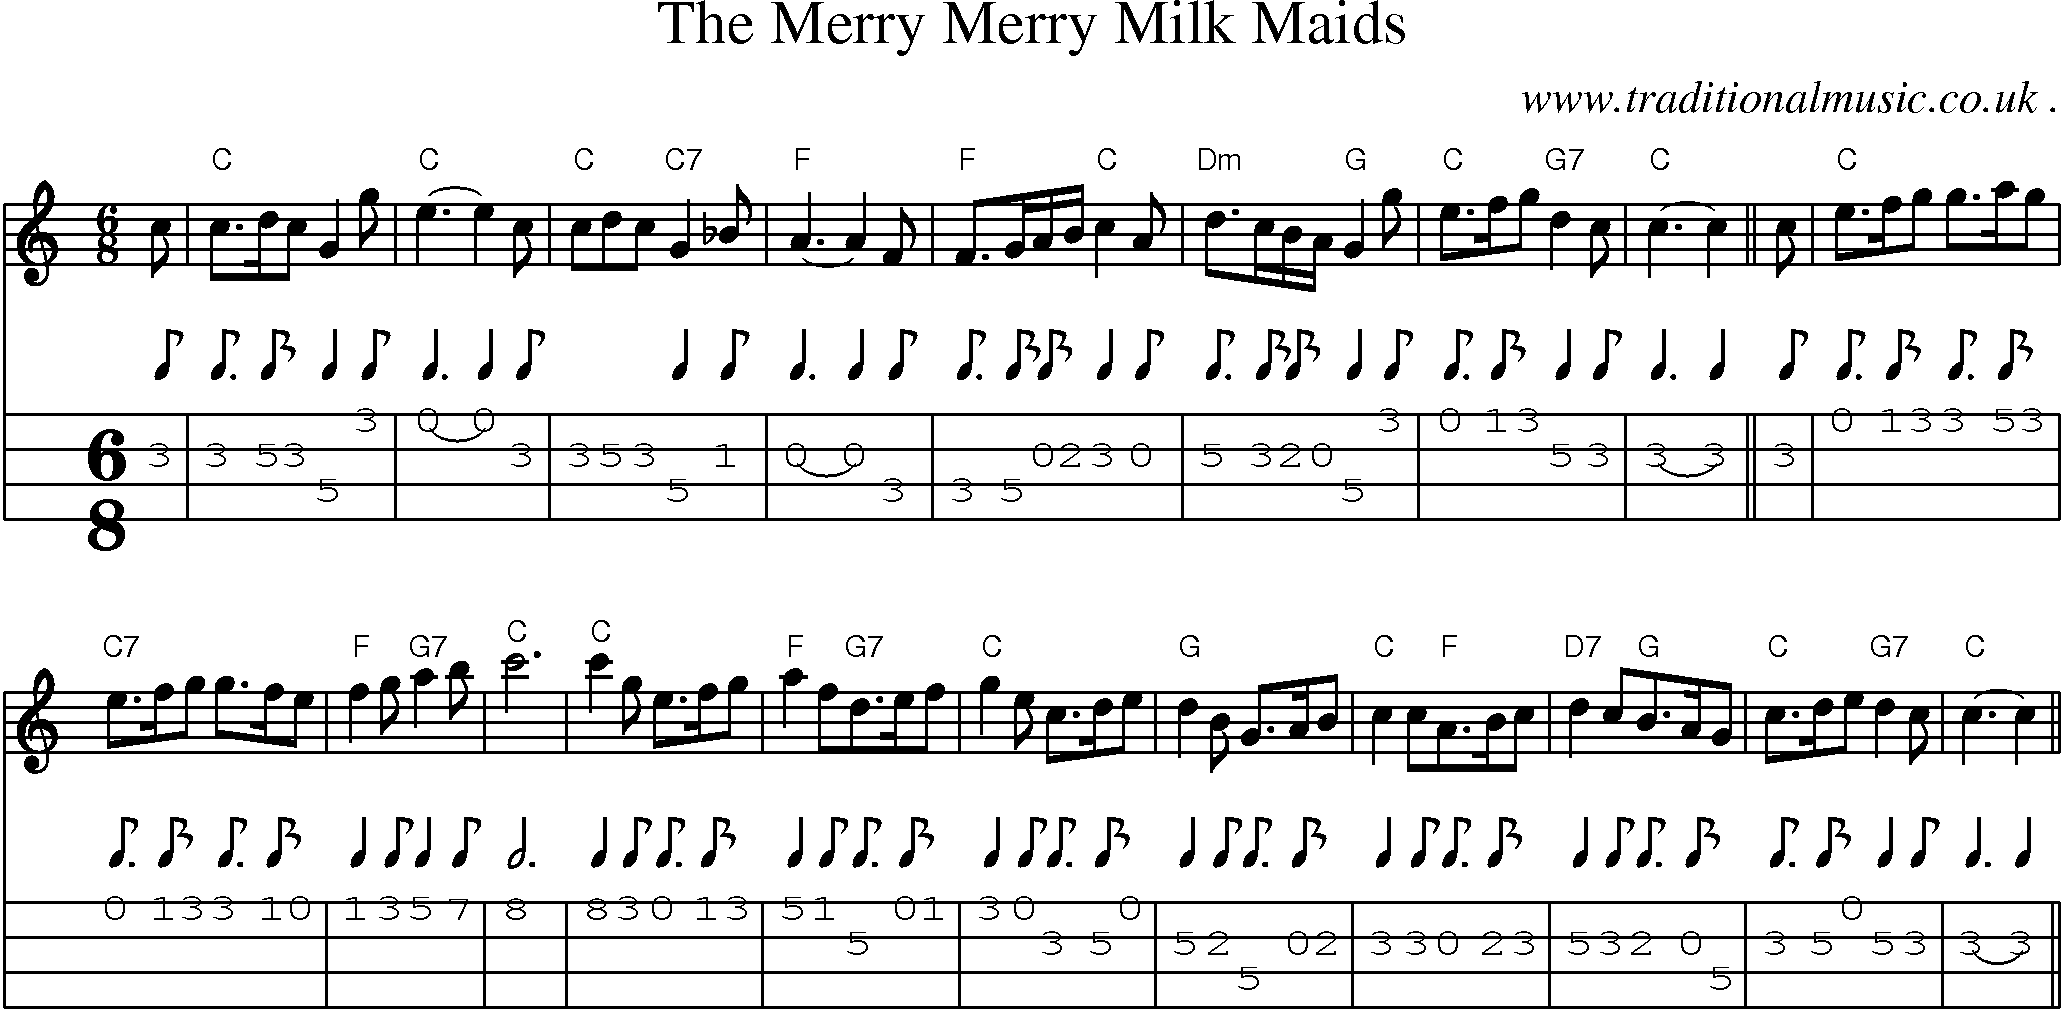 Sheet-Music and Mandolin Tabs for The Merry Merry Milk Maids